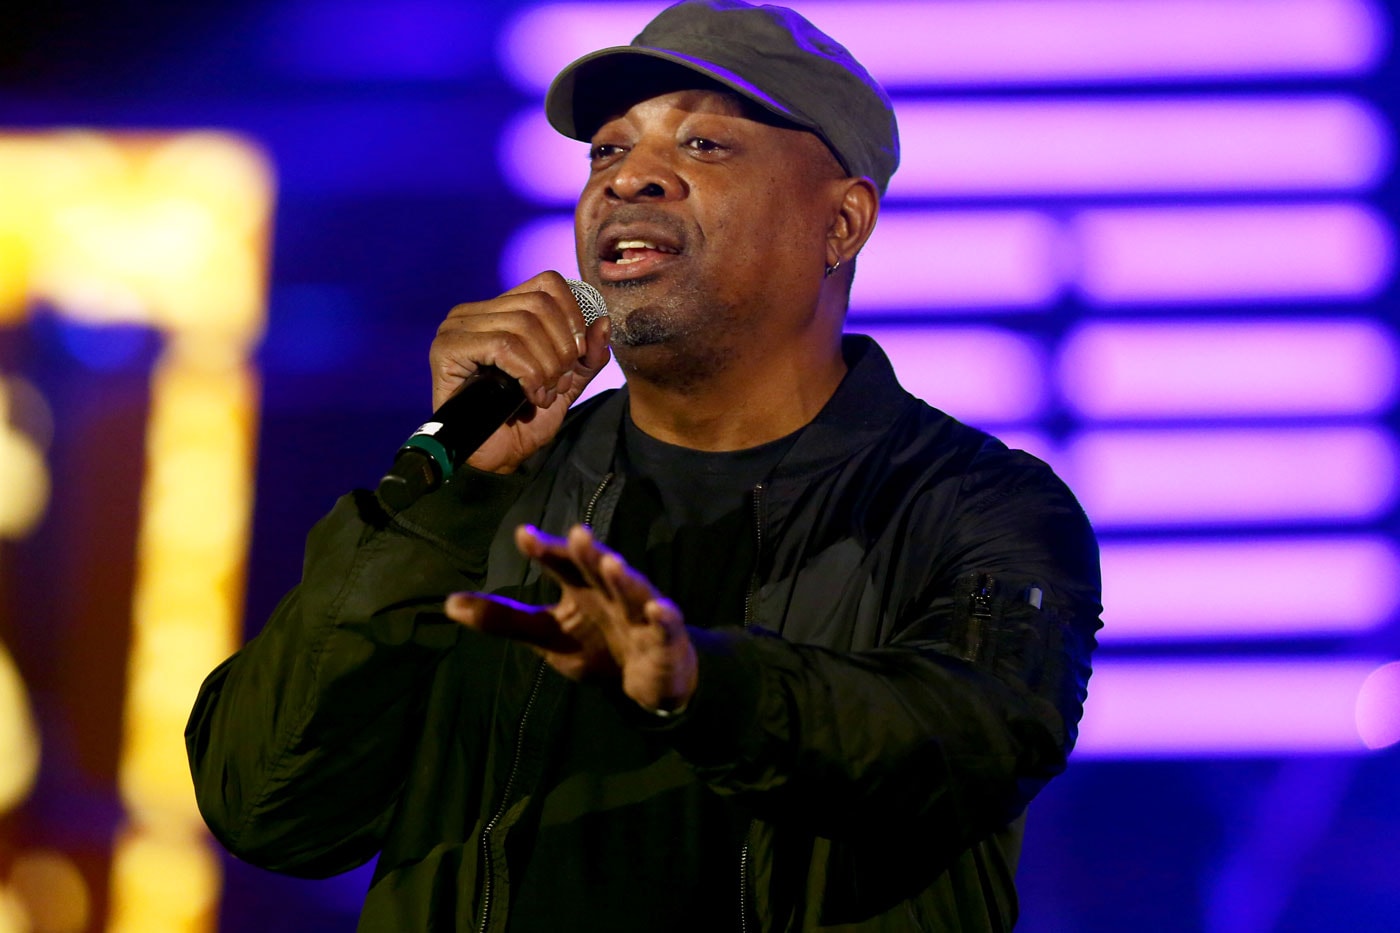 Chuck D Shares a Personal Letter from Tupac